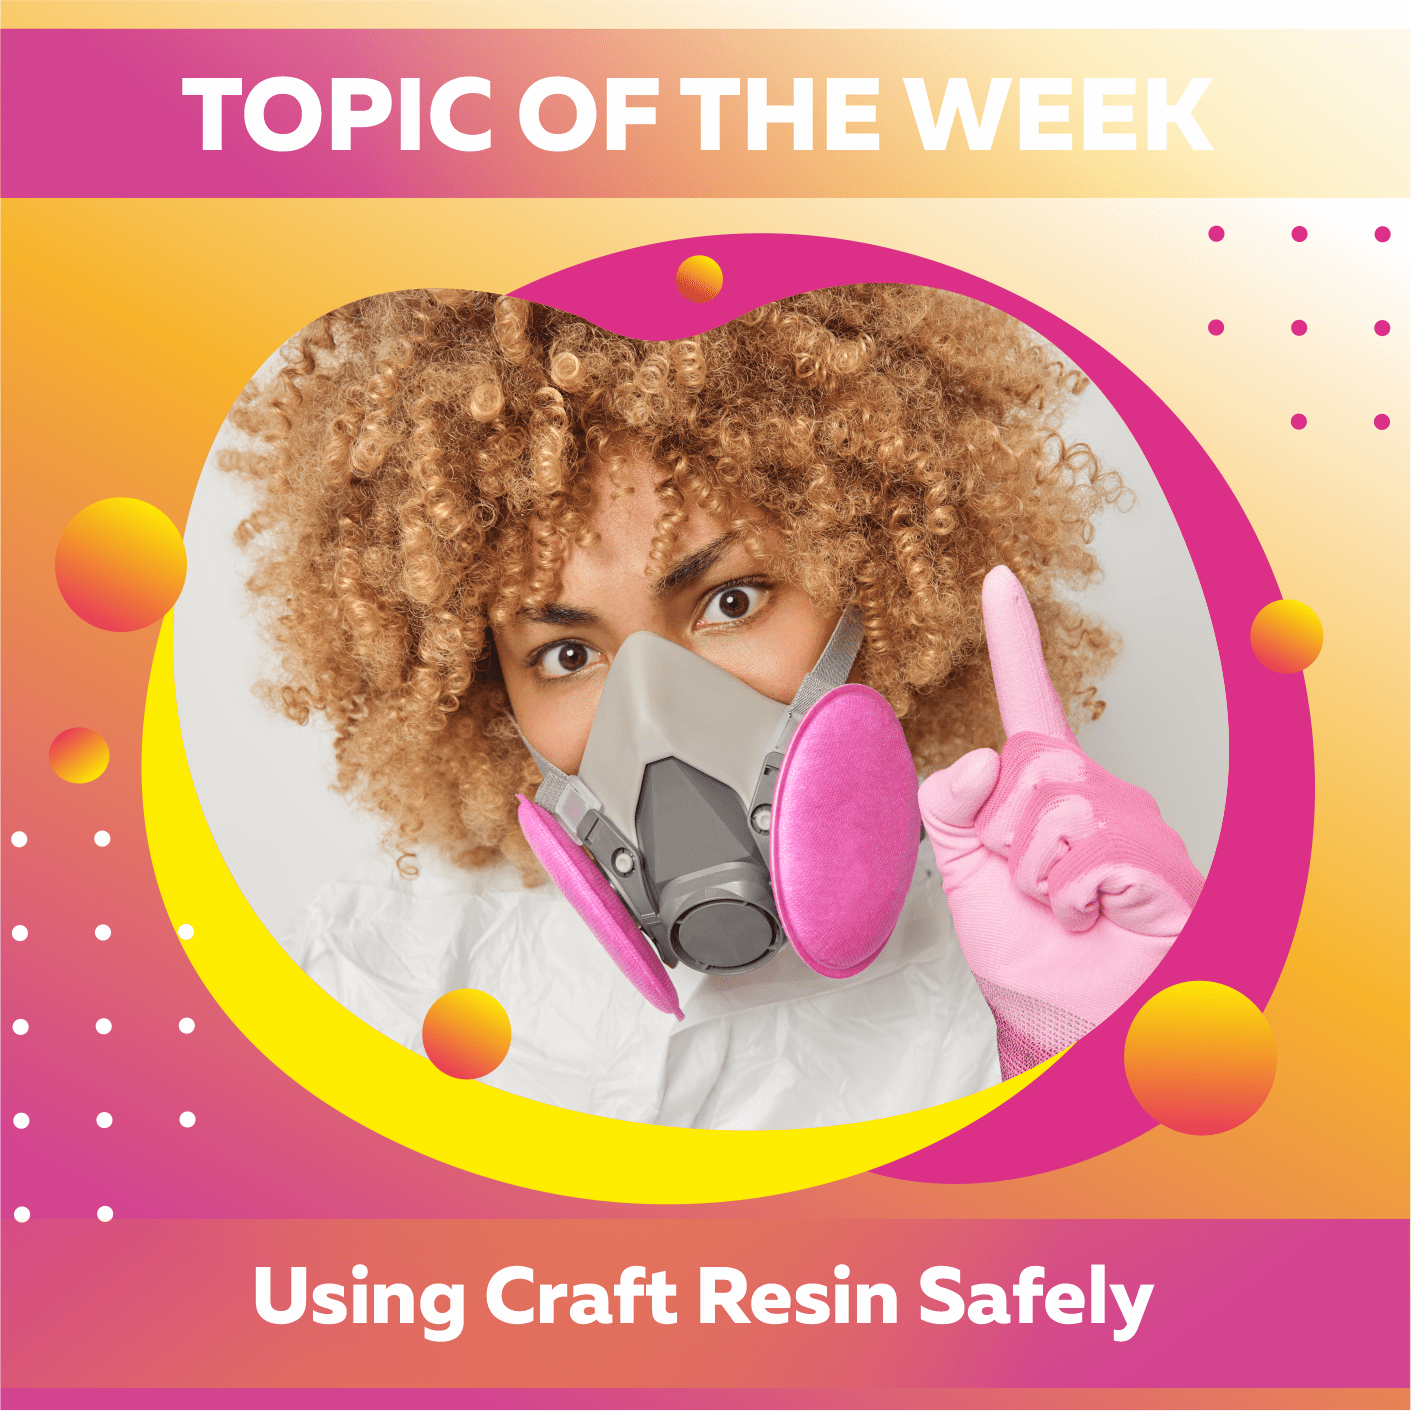 USING CRAFT RESIN SAFELY